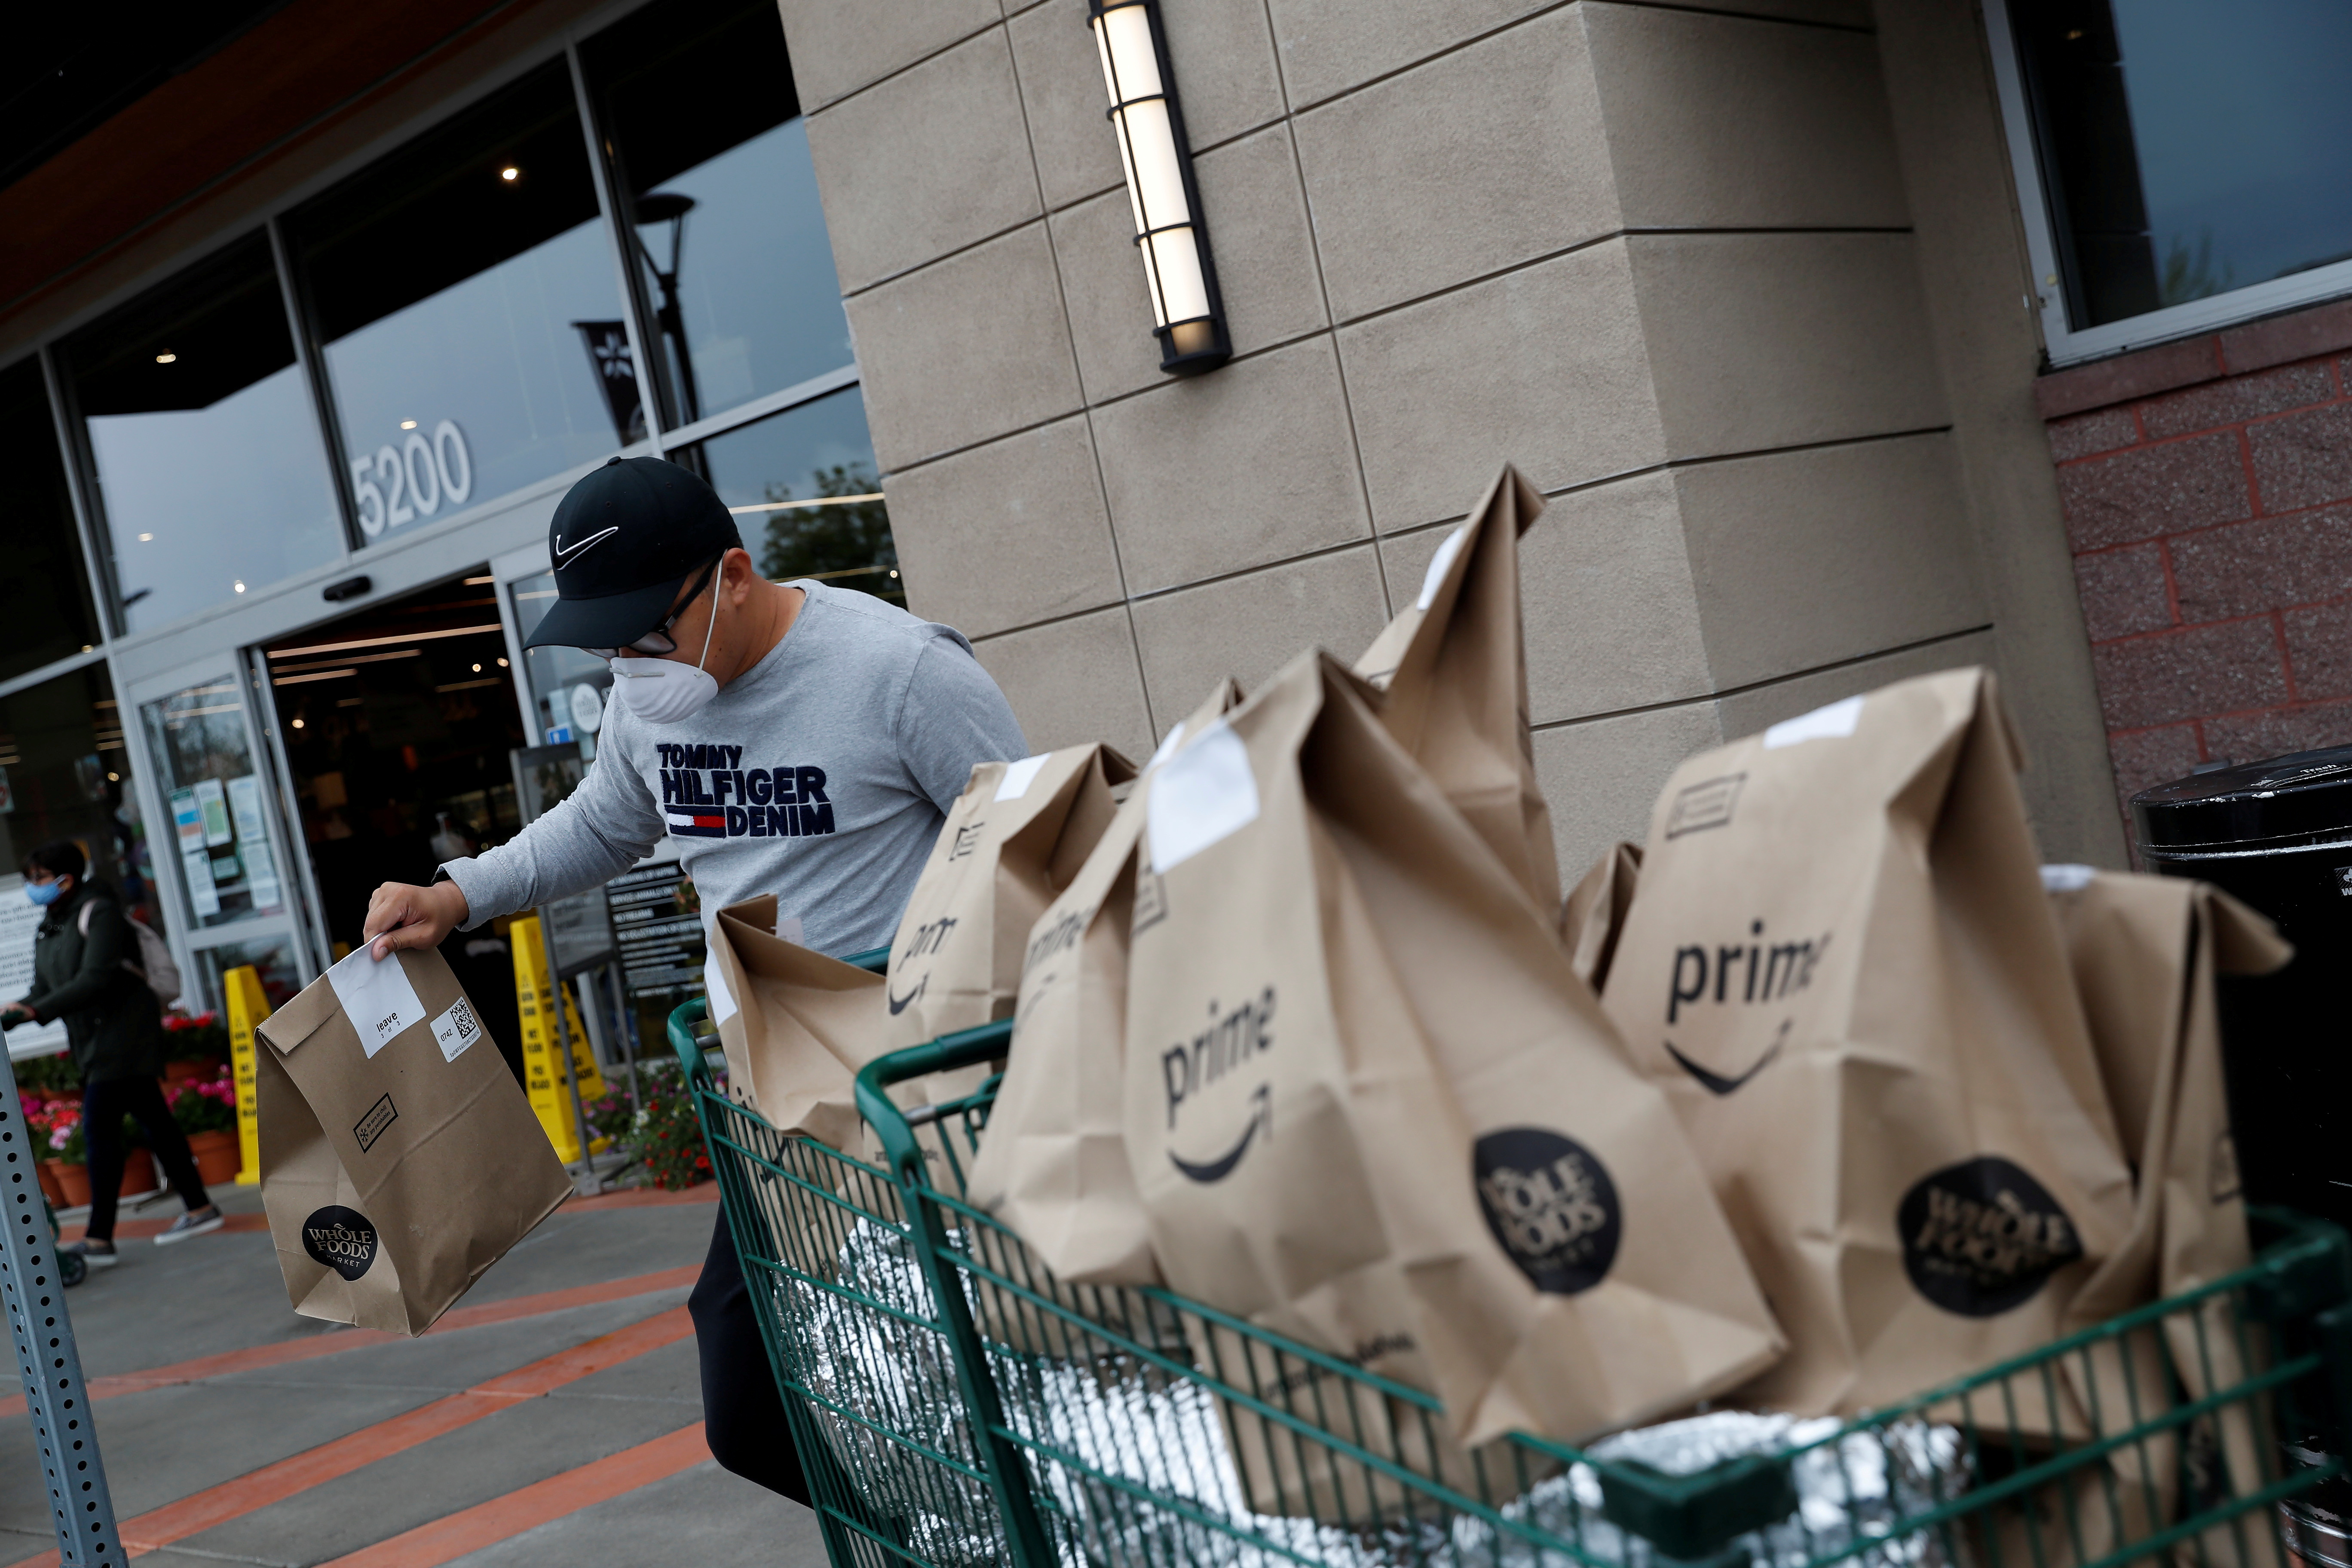 An independent contract delivery driver for Amazon Flex, wears a protective mask as he carries deliveries to his car near a Whole Foods Market, as spread of the coronavirus disease (COVID-19) continues, in Dublin, California, U.S., April 6, 2020. REUTERS/Shannon Stapleton/File Photo